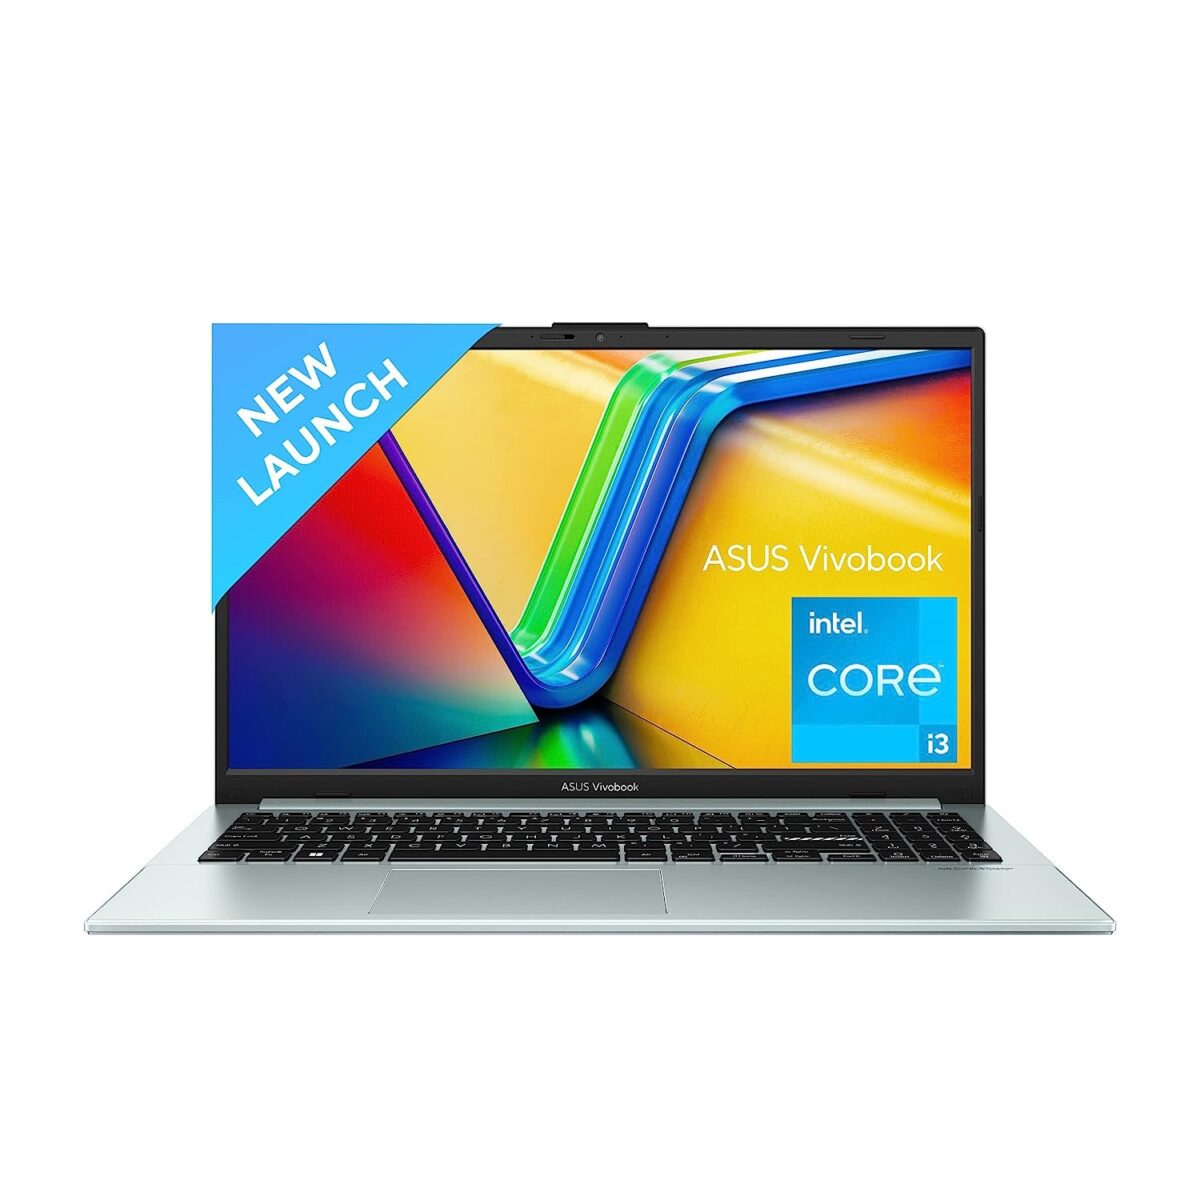 ASUS Vivobook Go 15 OLED 2023 E1504GA-LK323WS Launched in India ( 12th Gen Intel Core i3-N305 / 8GB ram / 512GB SSD )